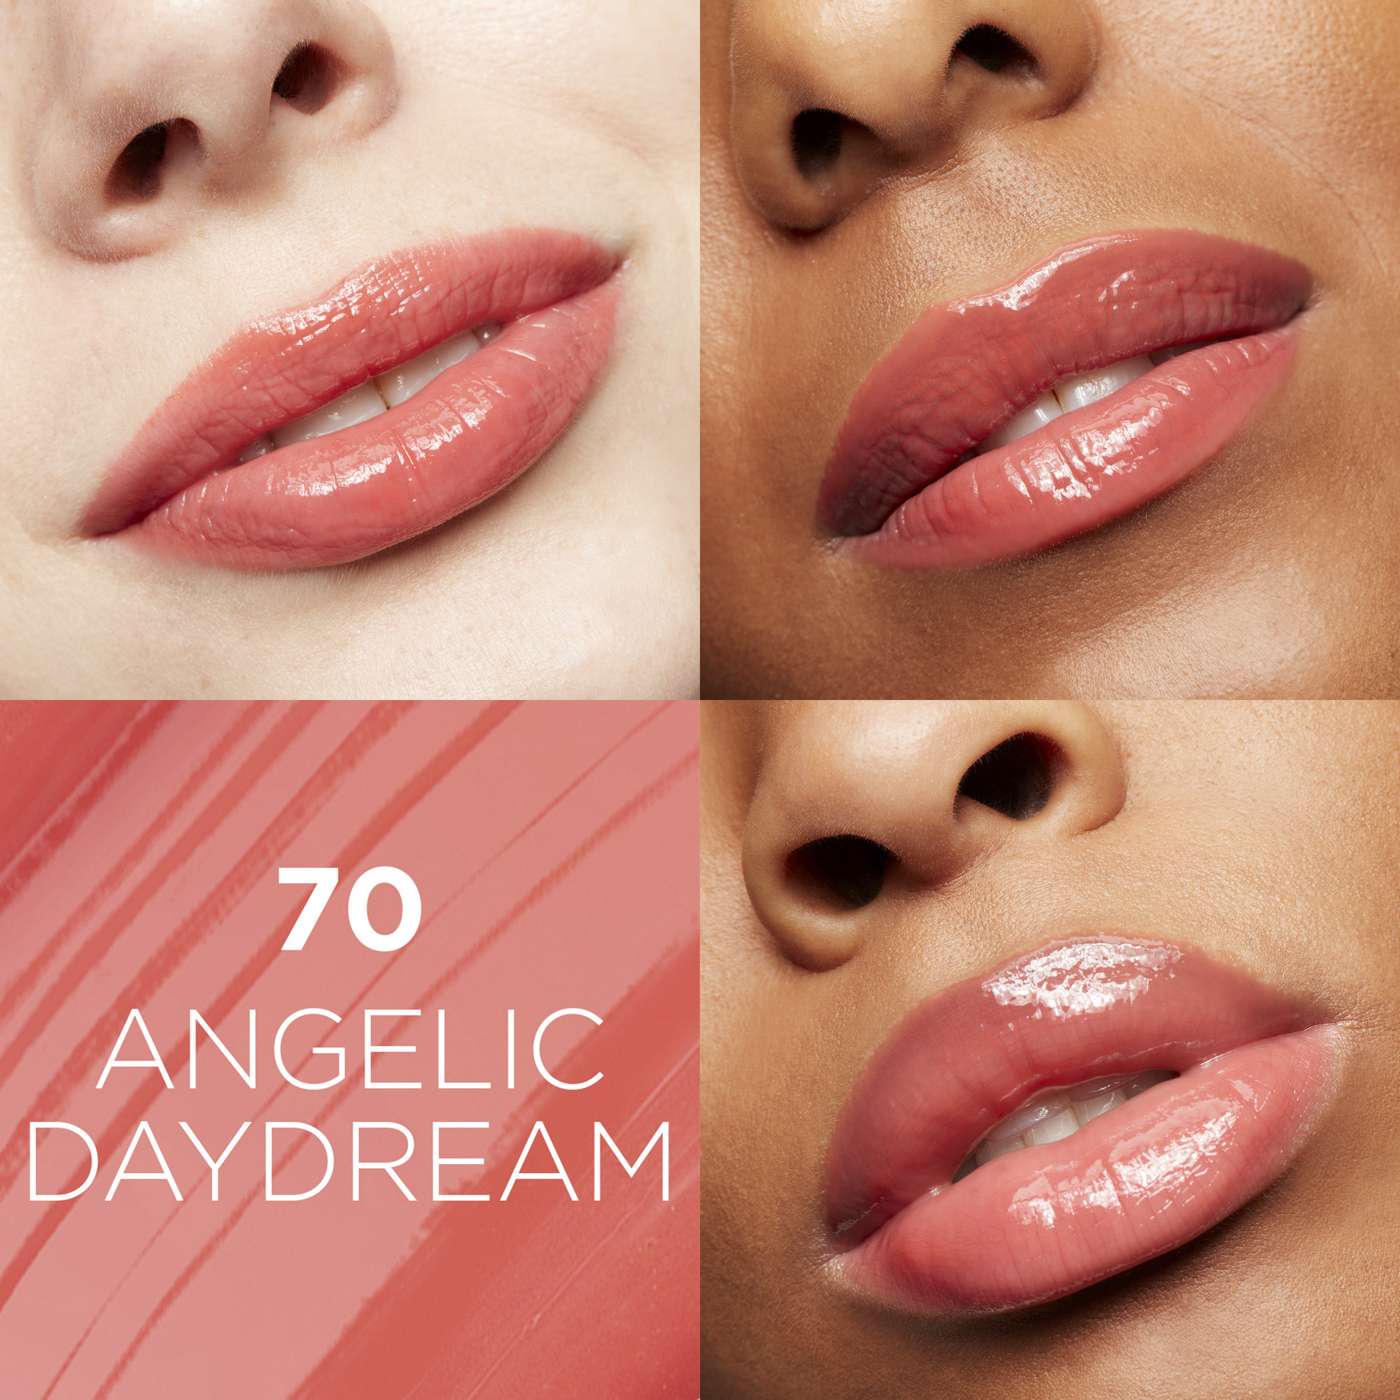 L'Oréal Paris Glow Paradise  Lip Balm-in-Gloss Pomegranate Extract Angelic Daydream; image 2 of 6